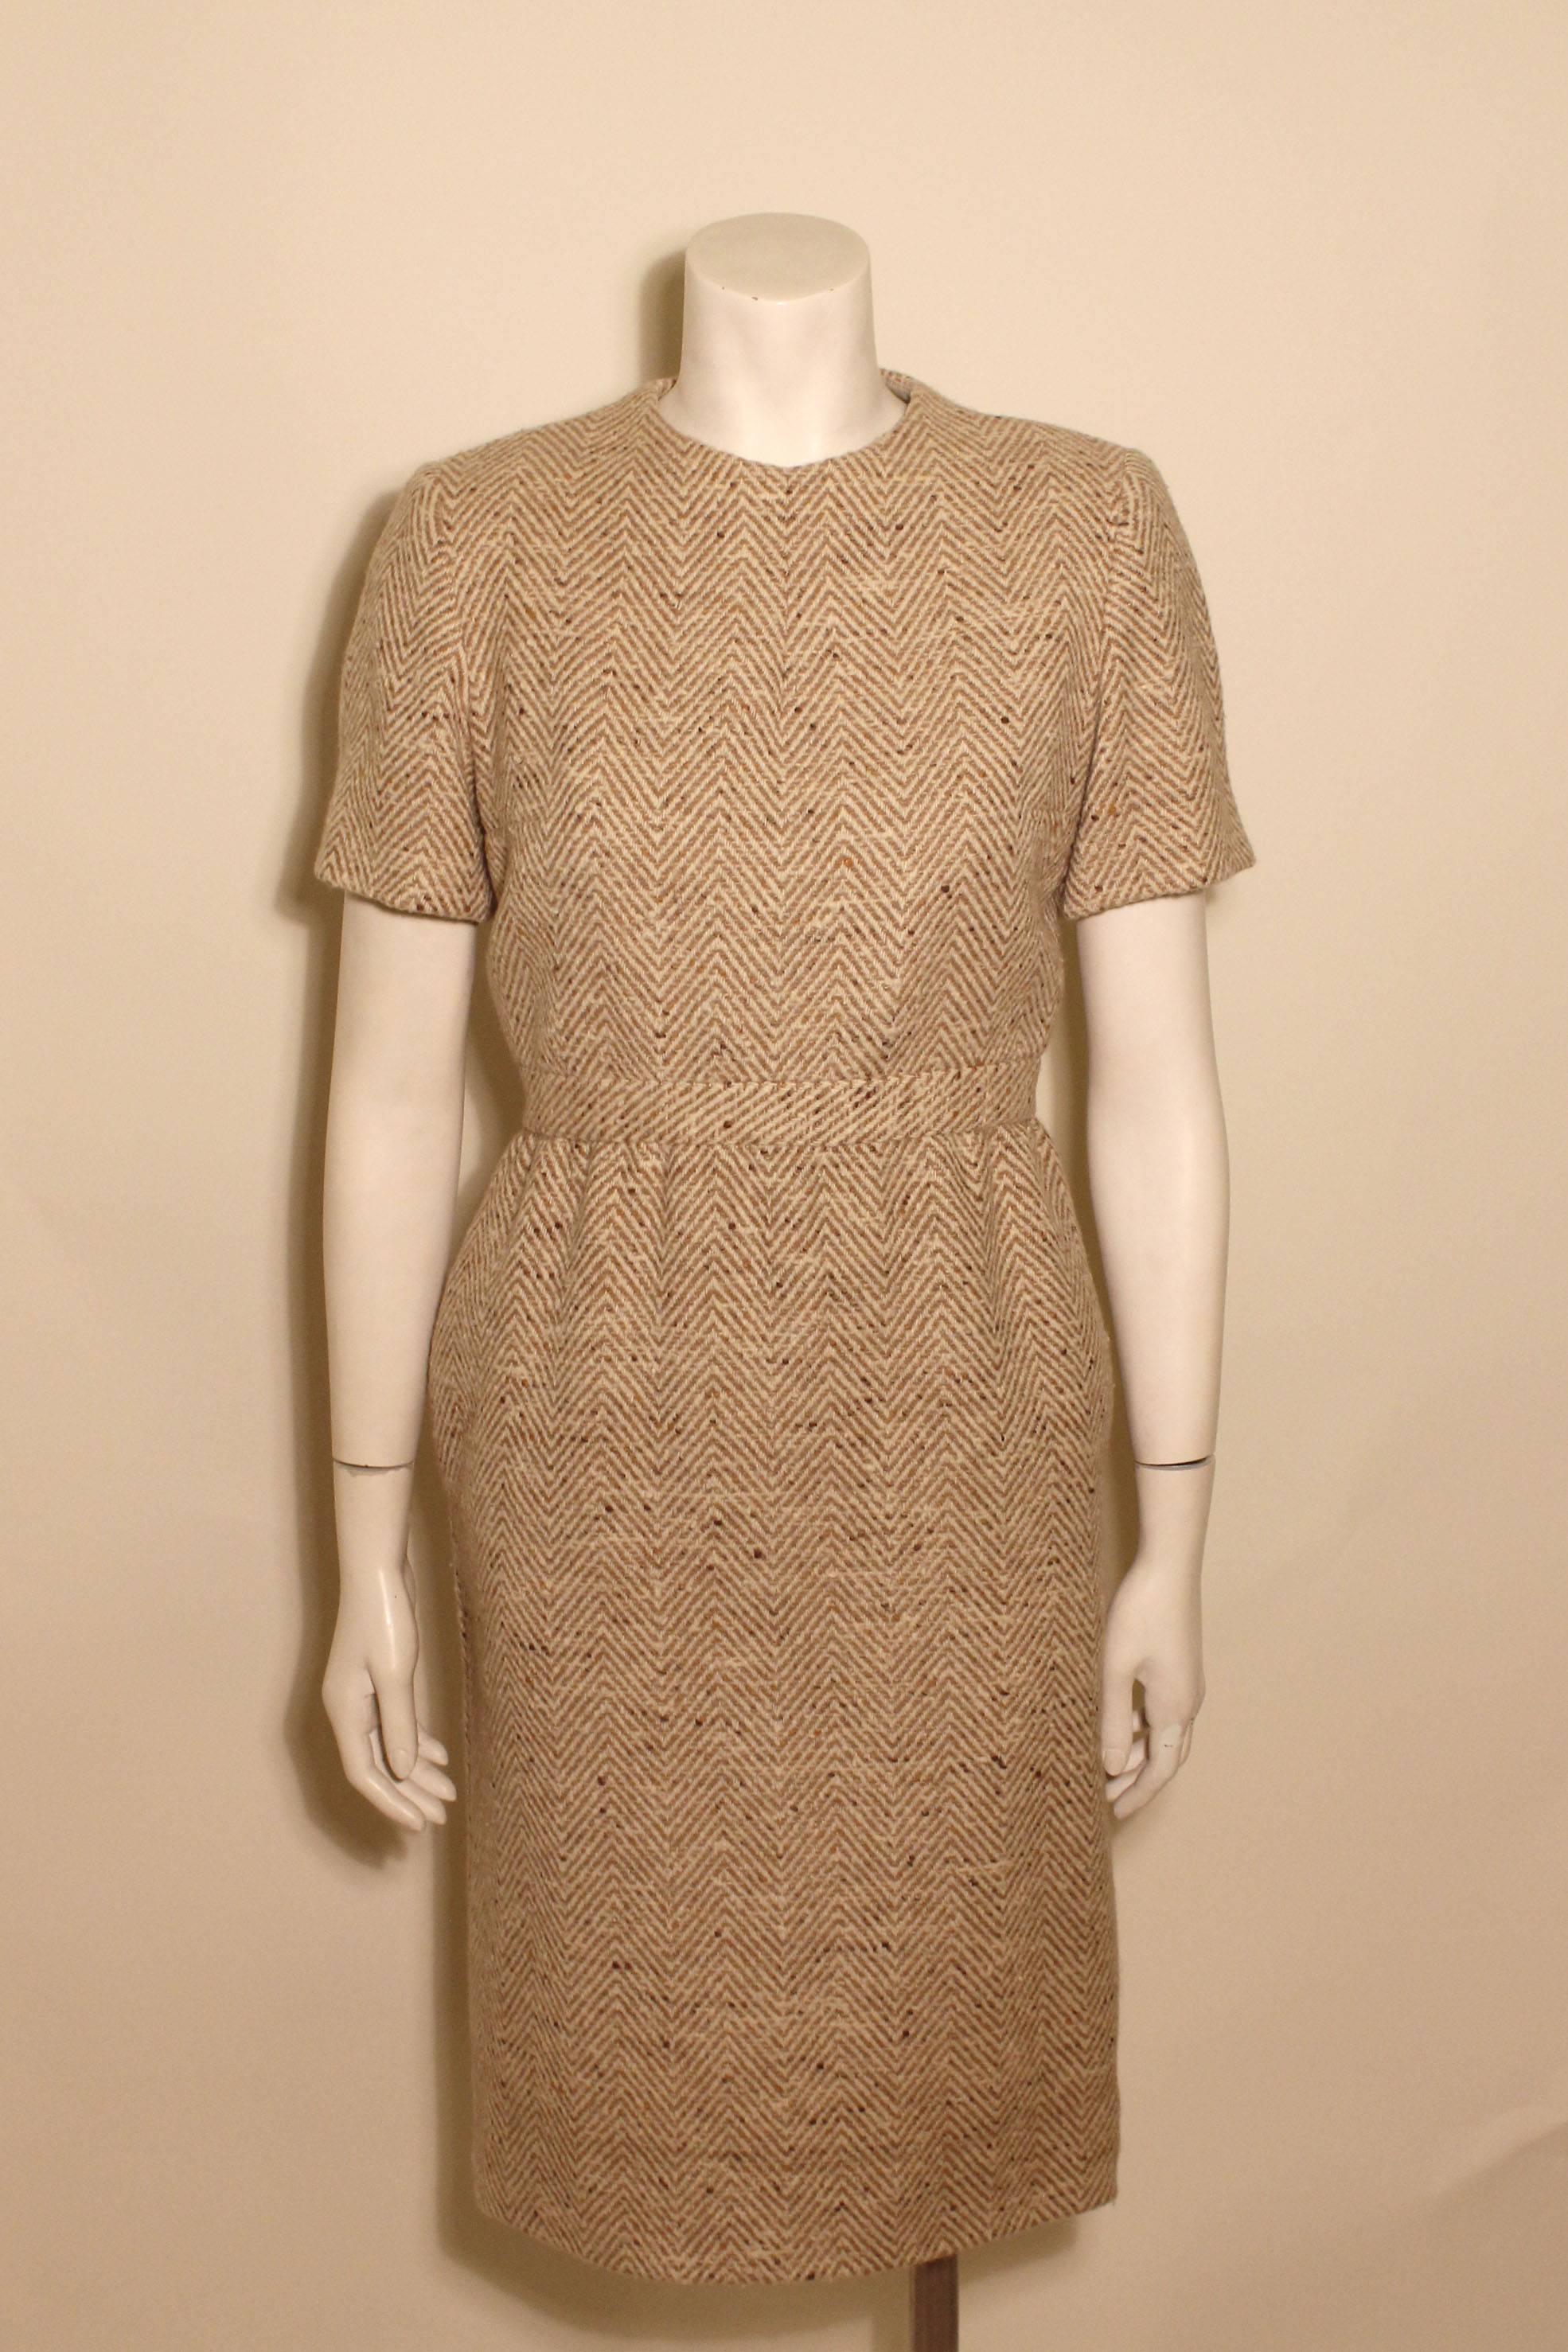 This tan tweed Trigere dress includes a banded waist and short sleeves. The chic covered buttons of the tweed dress are down the back. It has a full silk lining. 